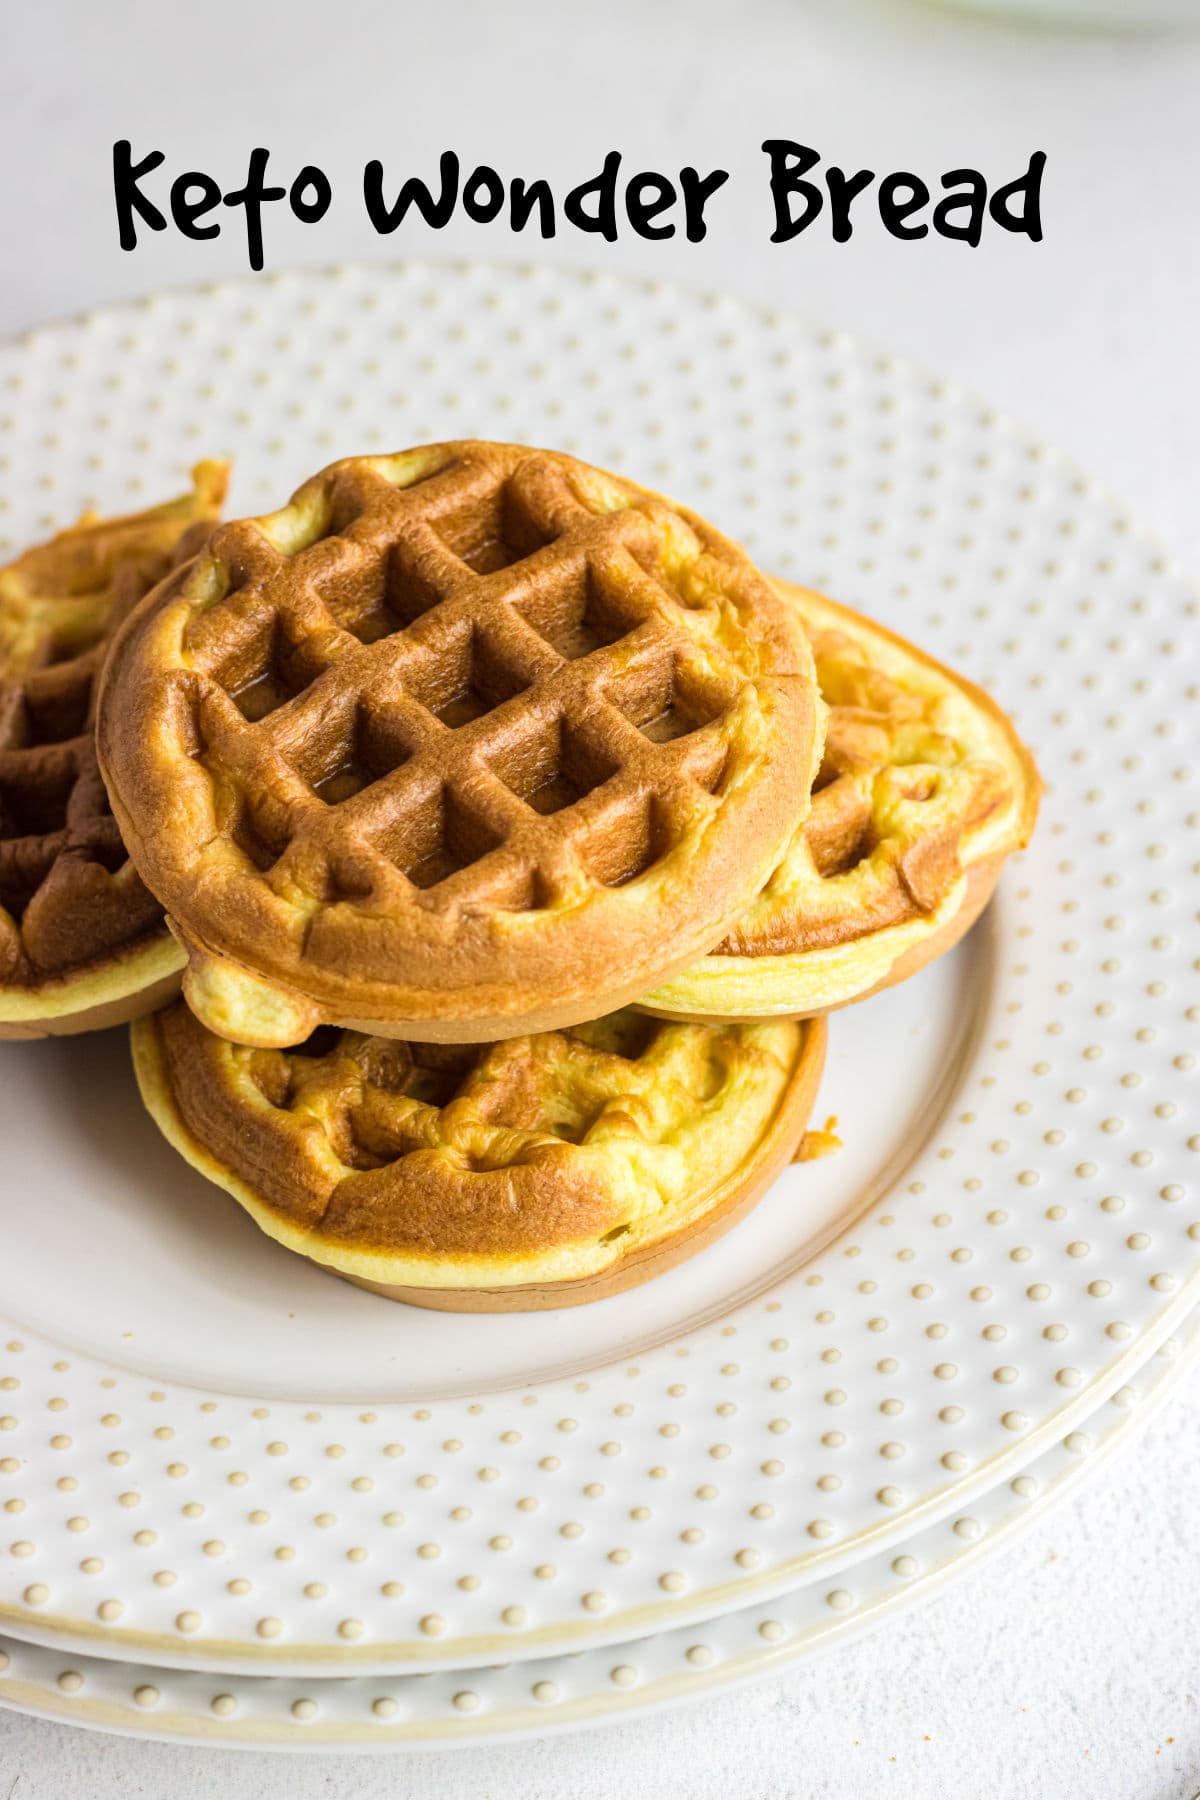 Closeup of keto wonder bread chaffles on a plate with a title text overlay.